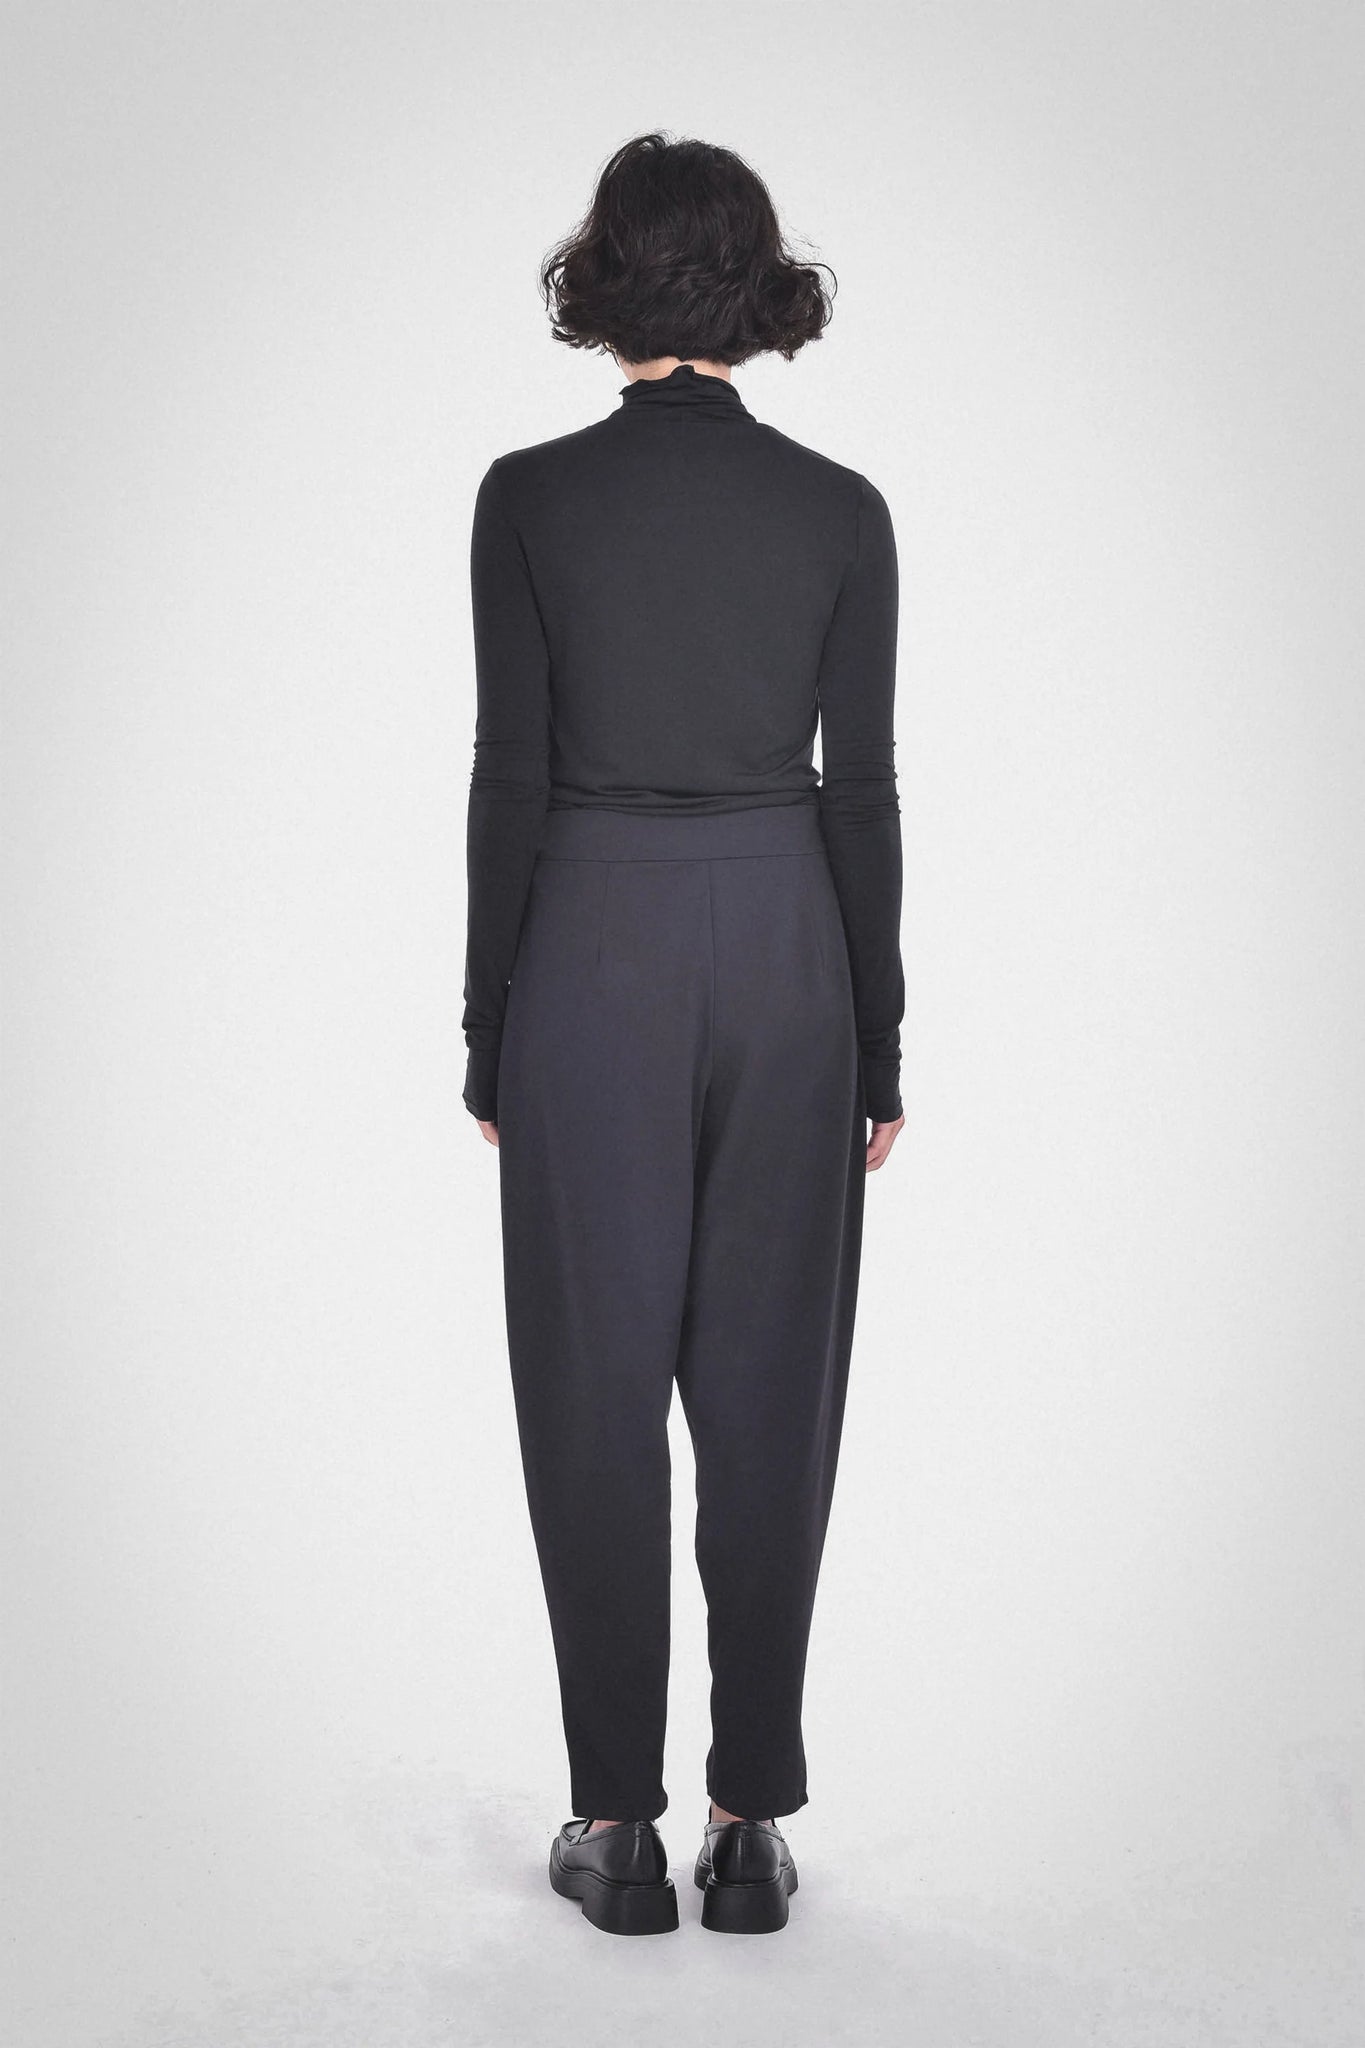 photo of model wearing Galvan A-Symmetrical Pants in black from paper label available at UniKoncept in Waterloo back view